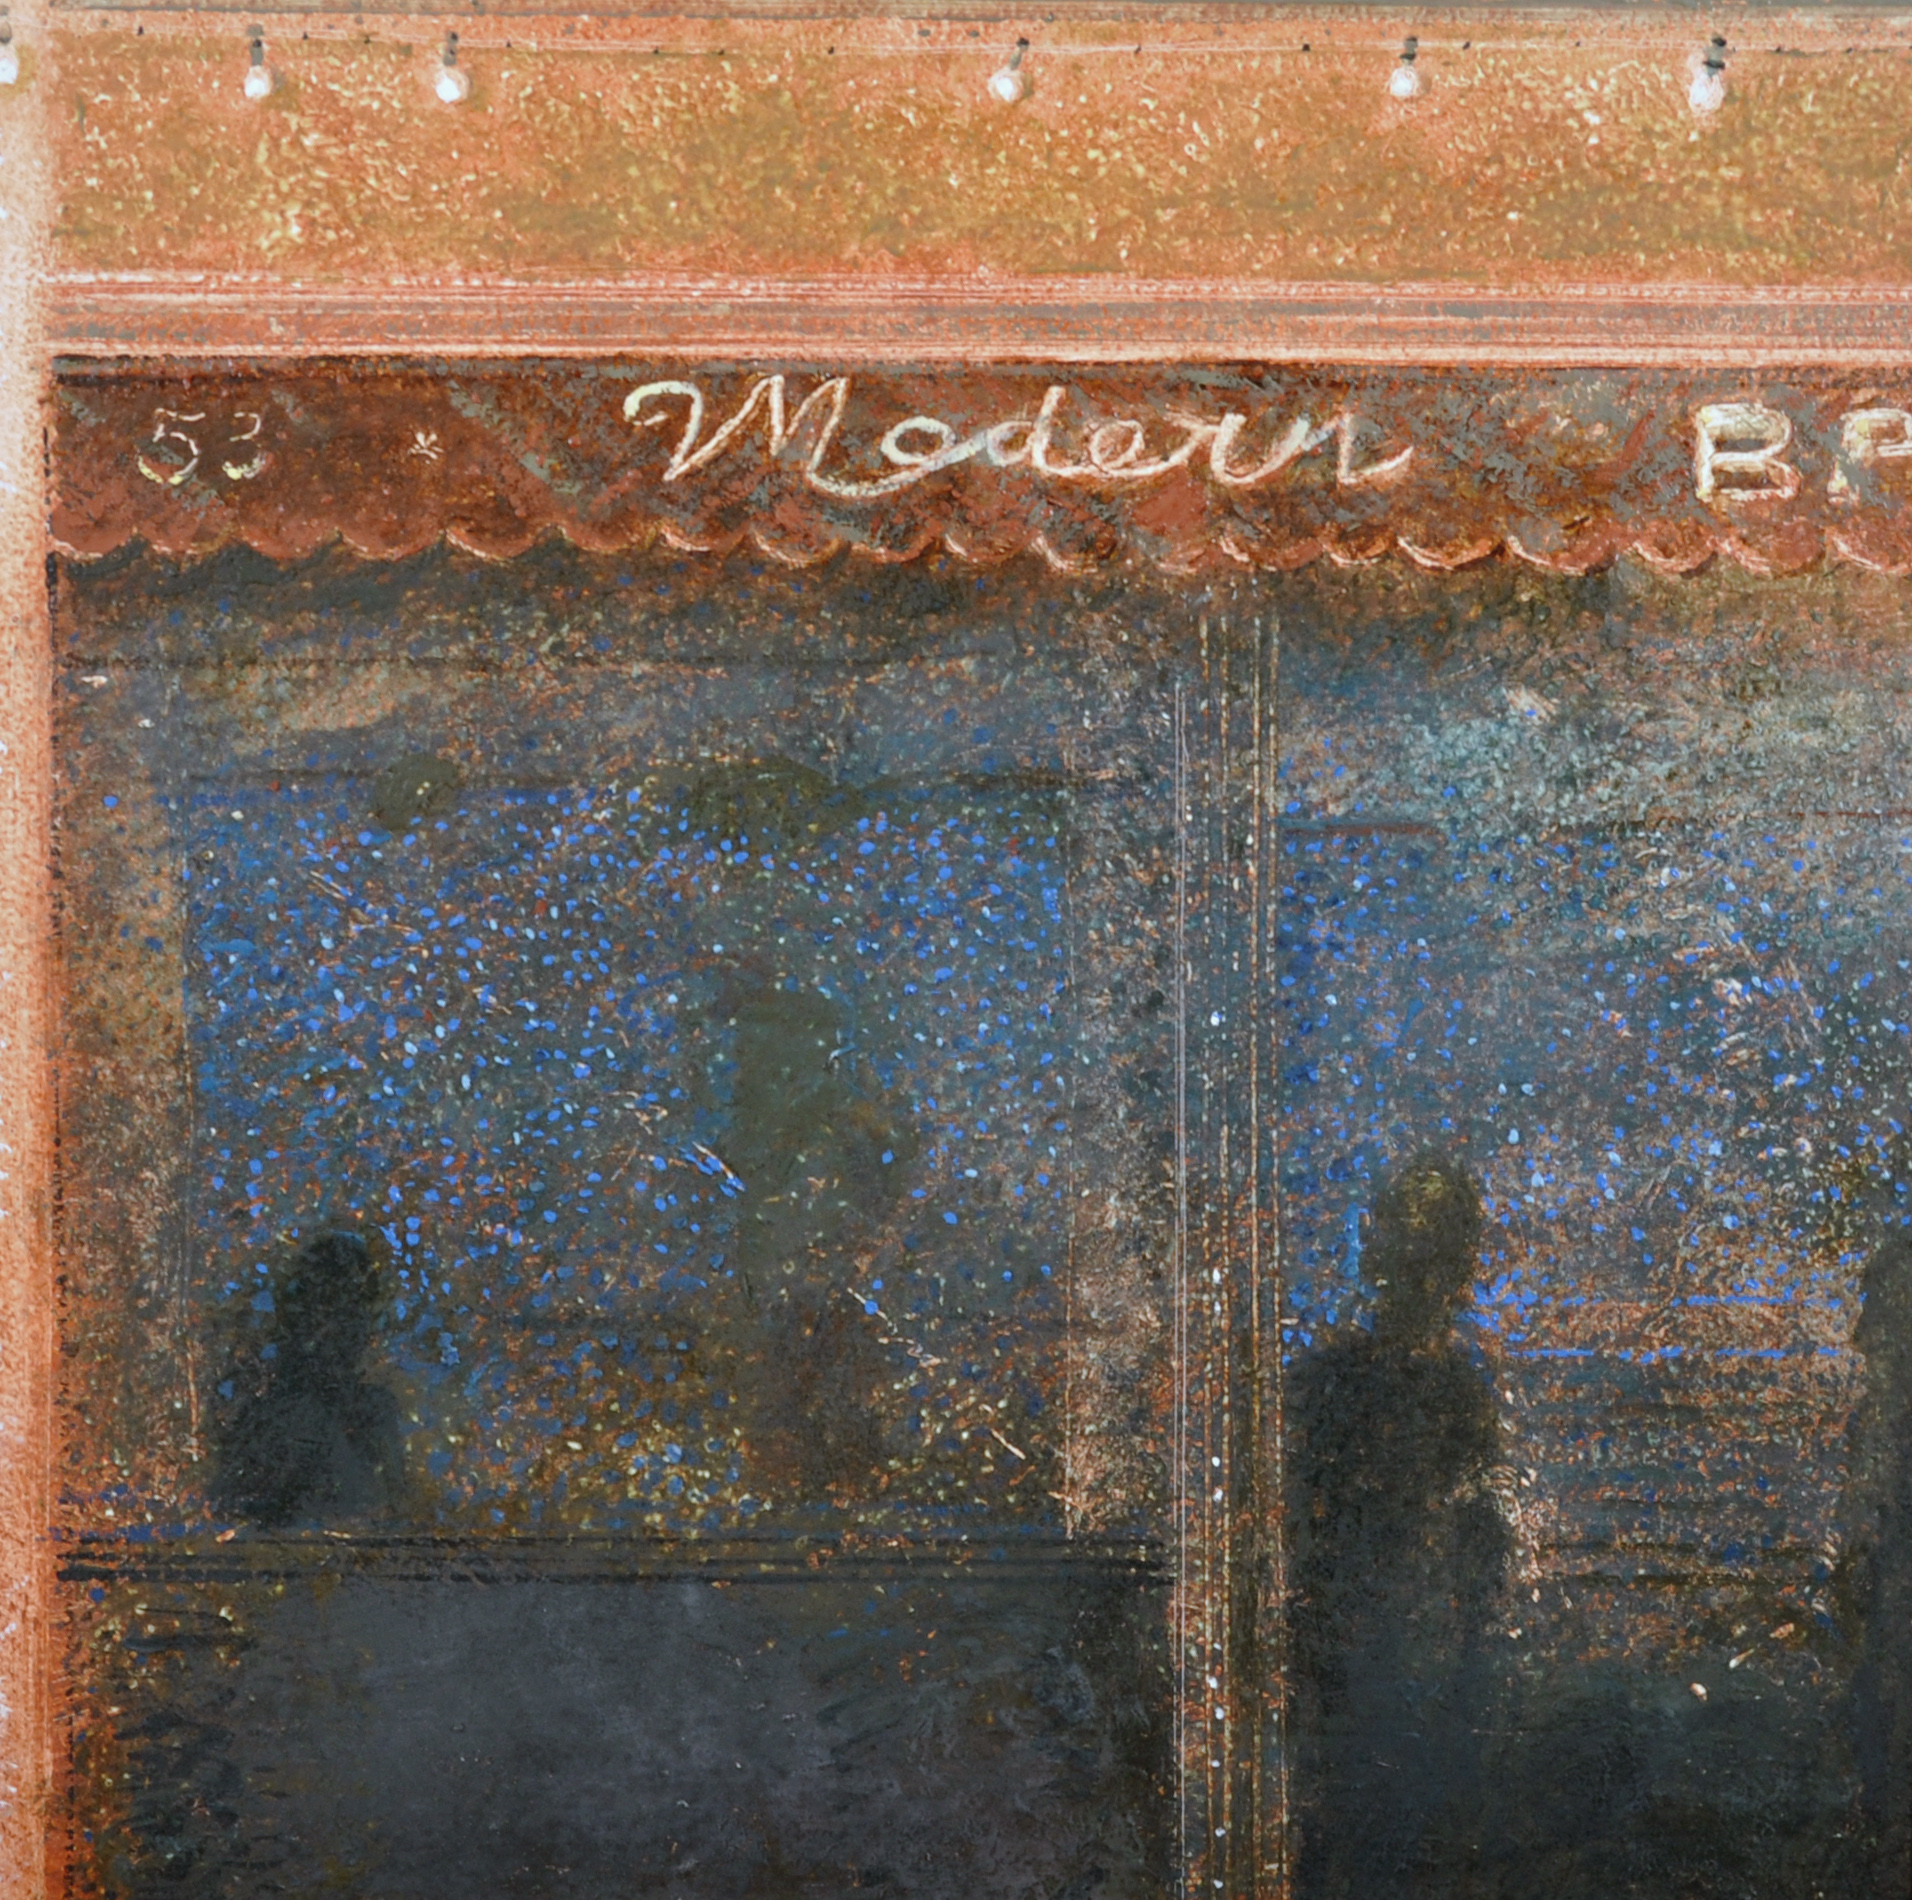 M... Peacock (20th Century) British. "Modern Bar", Oil on Board, Signed, Inscribed and dated 1991 on